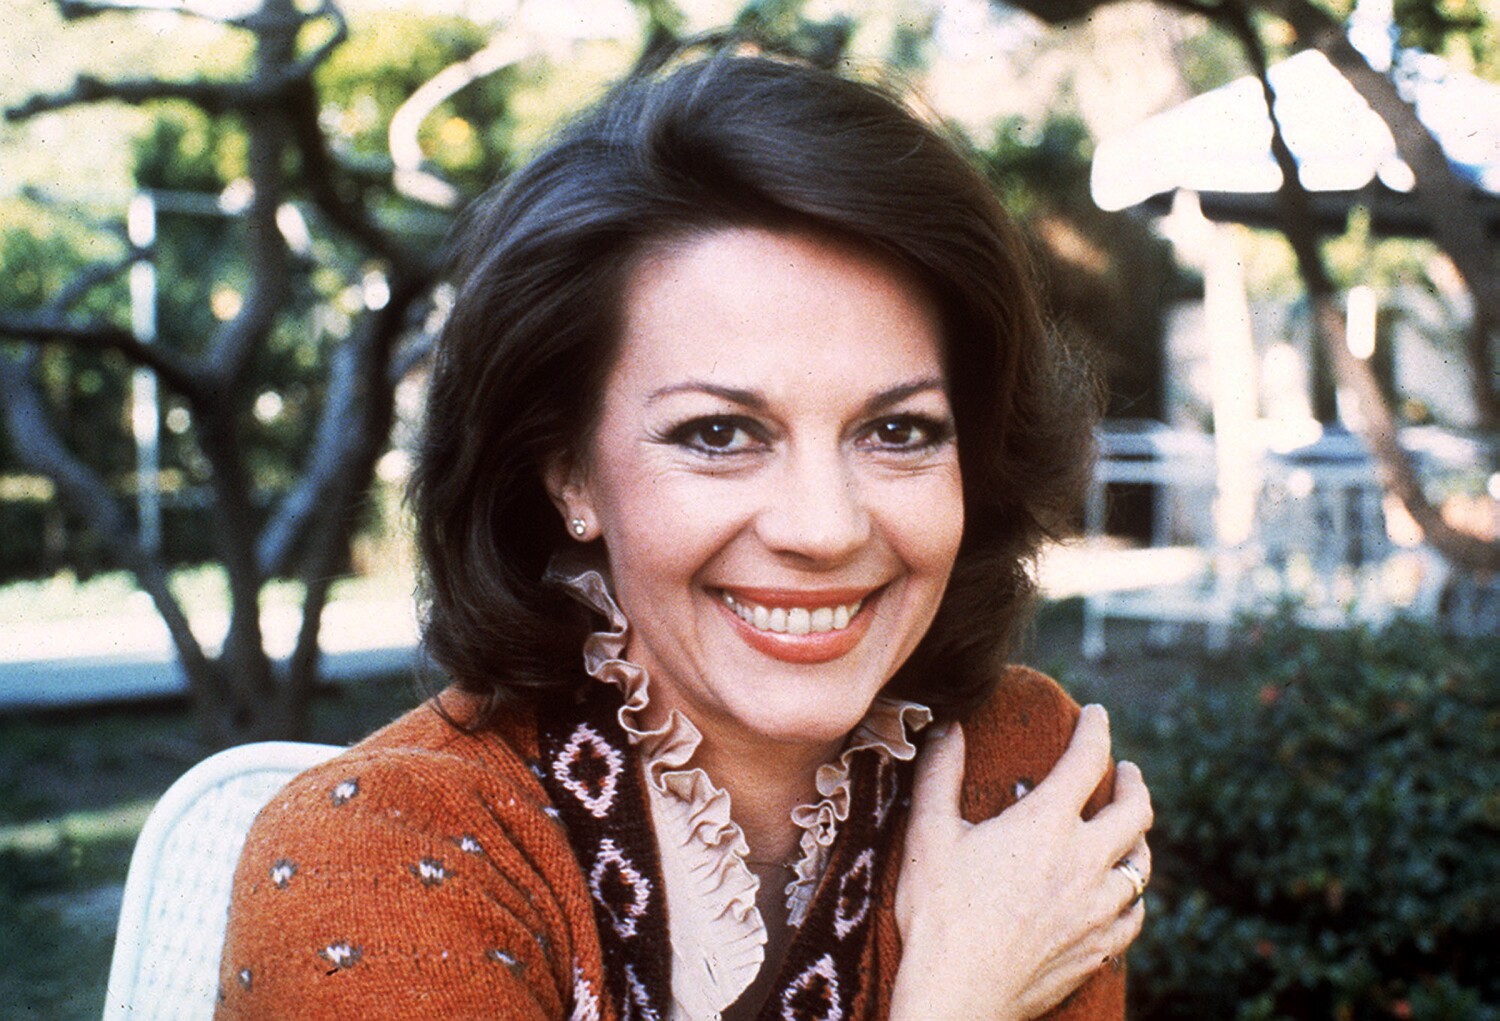 40 years later, the mystery over Natalie Wood's death endures